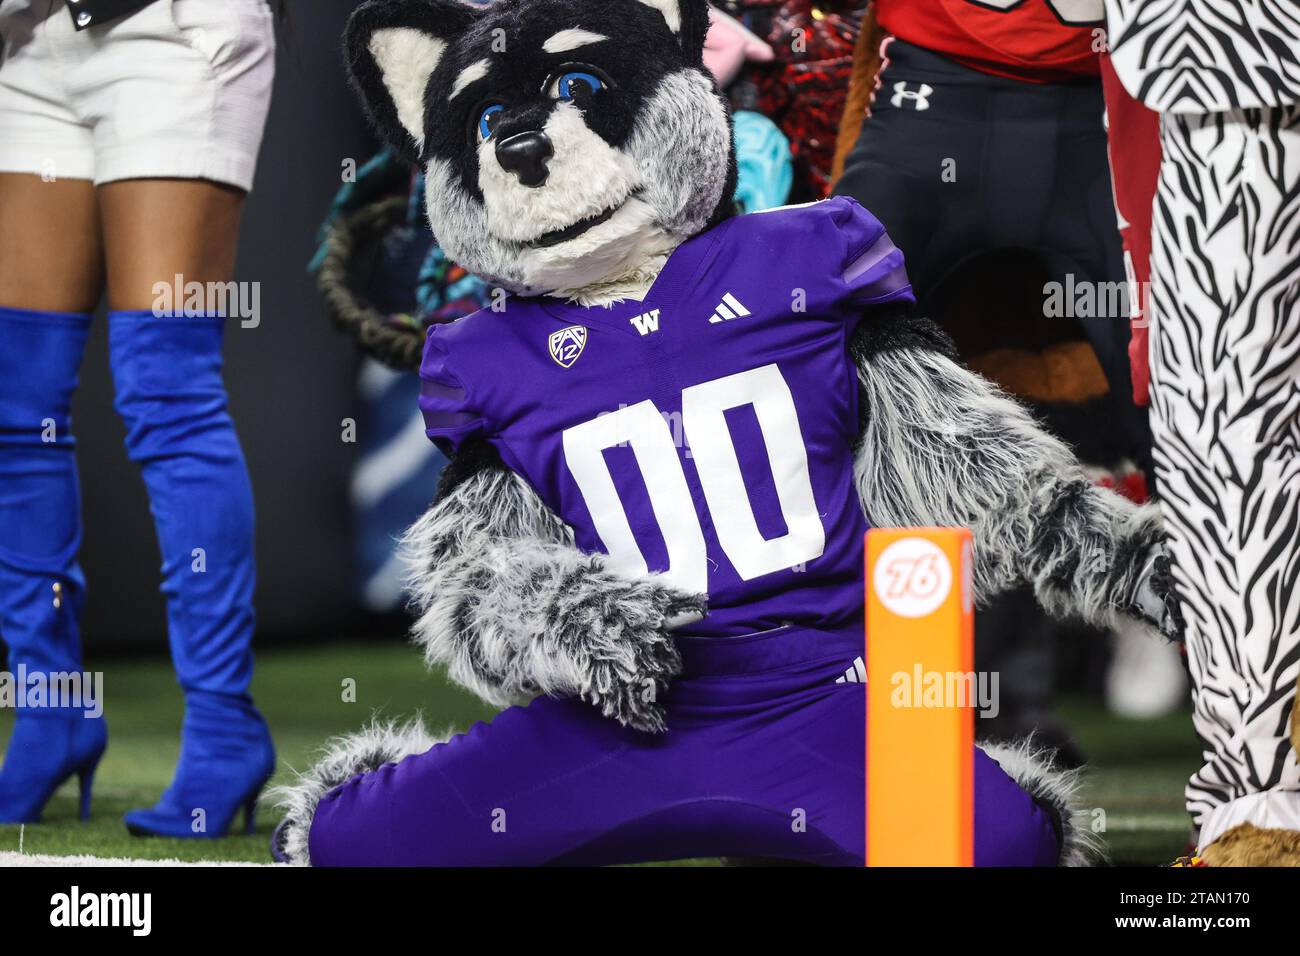 Las Vegas, NV, USA. 01st Dec, 2023. The Washington Huskies mascot Harry the Huskies on the sidelines during the second half of the Pac-12 Football Championship Game featuring the Oregon Ducks and the Washington Huskies at Allegiant Stadium in Las Vegas, NV. Christopher Trim/CSM/Alamy Live News Stock Photo